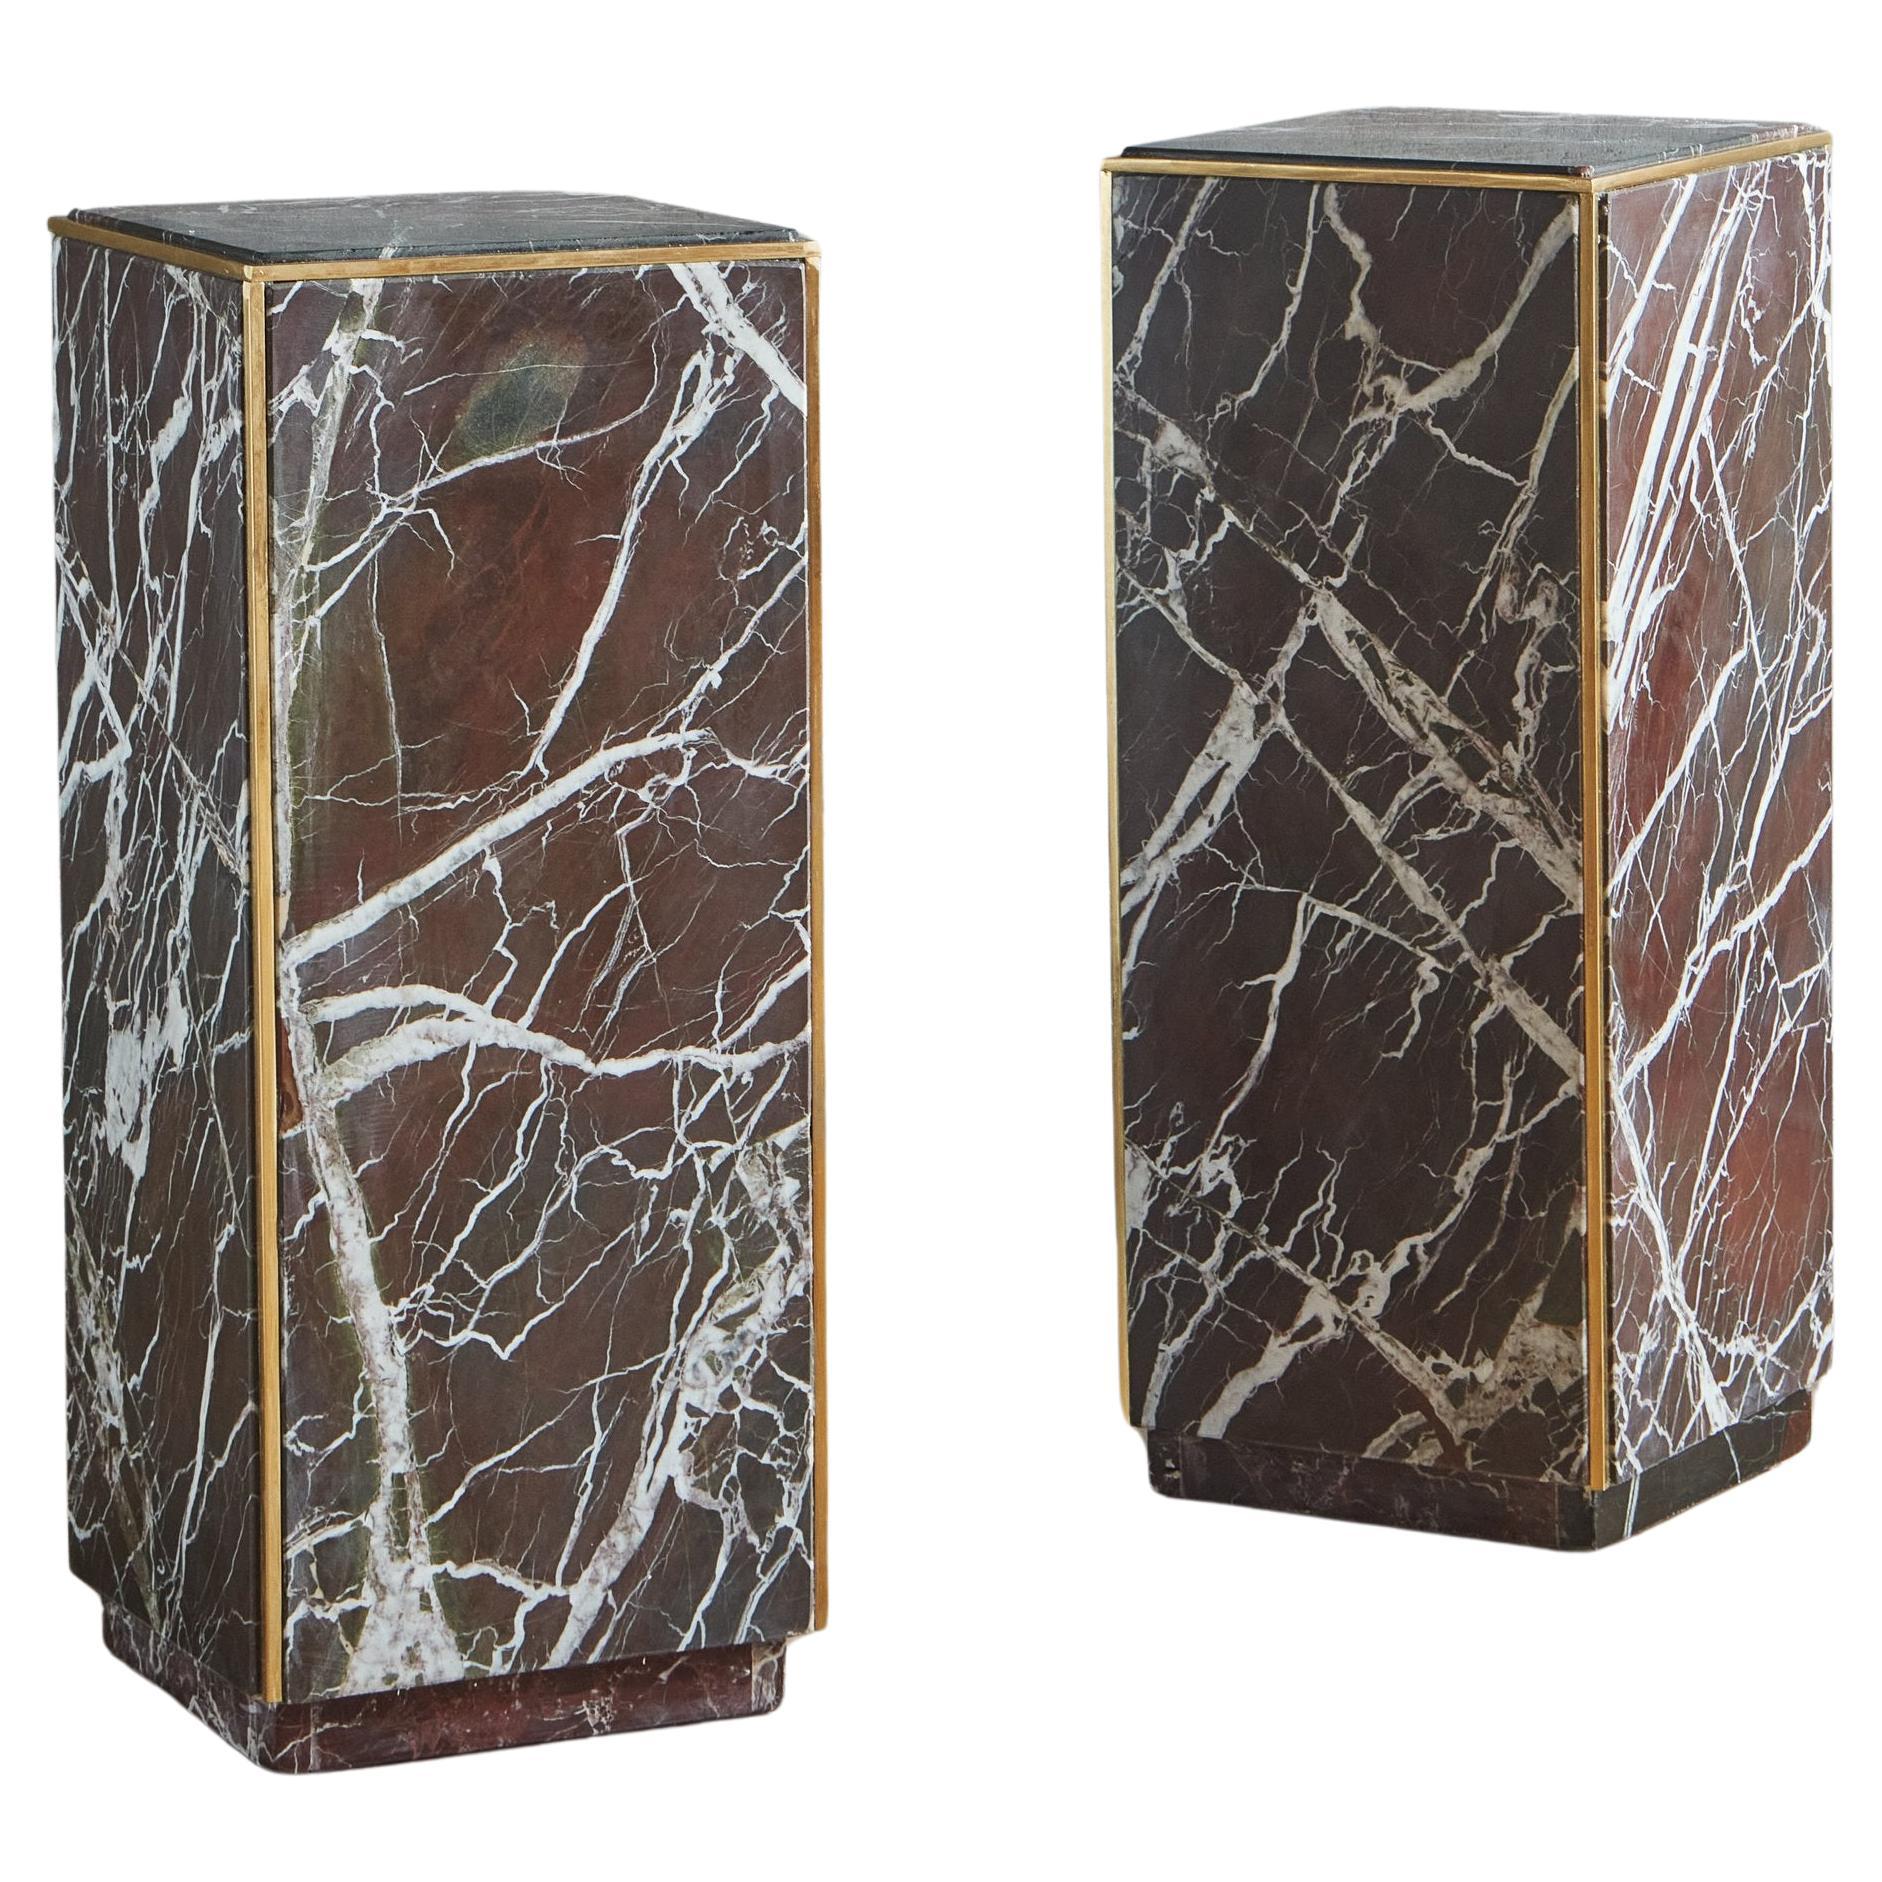 Rouge Marble Pedestal Stand with Brass Trim, 20th Century - 2 Available For Sale